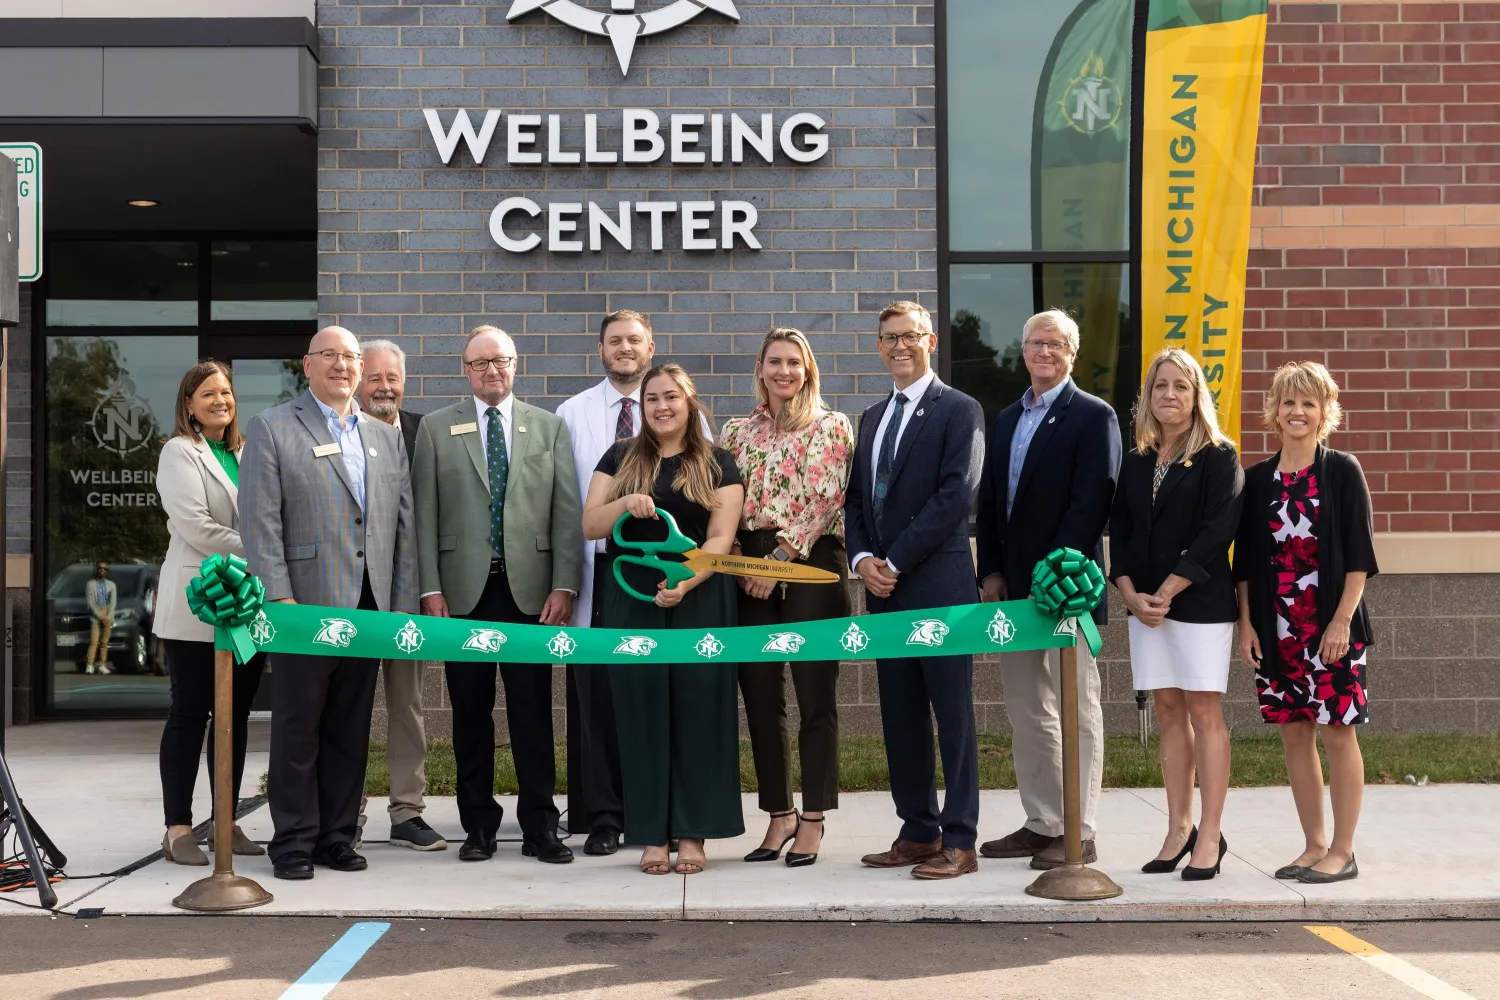 President Tessman with a group of people at the WellBeing Center dedication ceremony